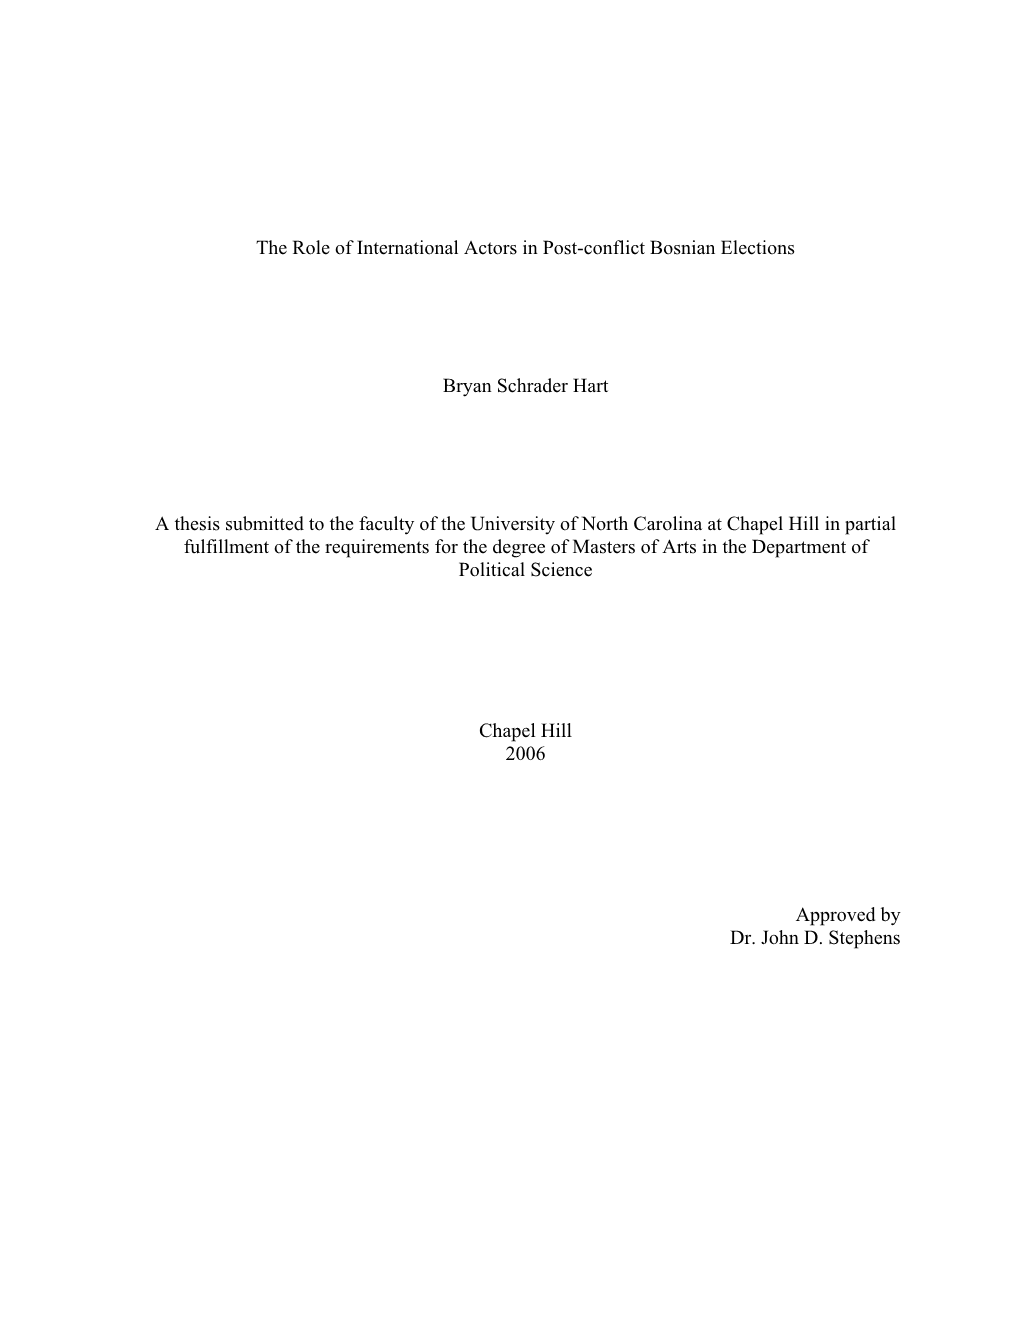 The Role of International Actors in Post-Conflict Bosnian Elections Bryan Schrader Hart a Thesis Submitted to the Faculty Of